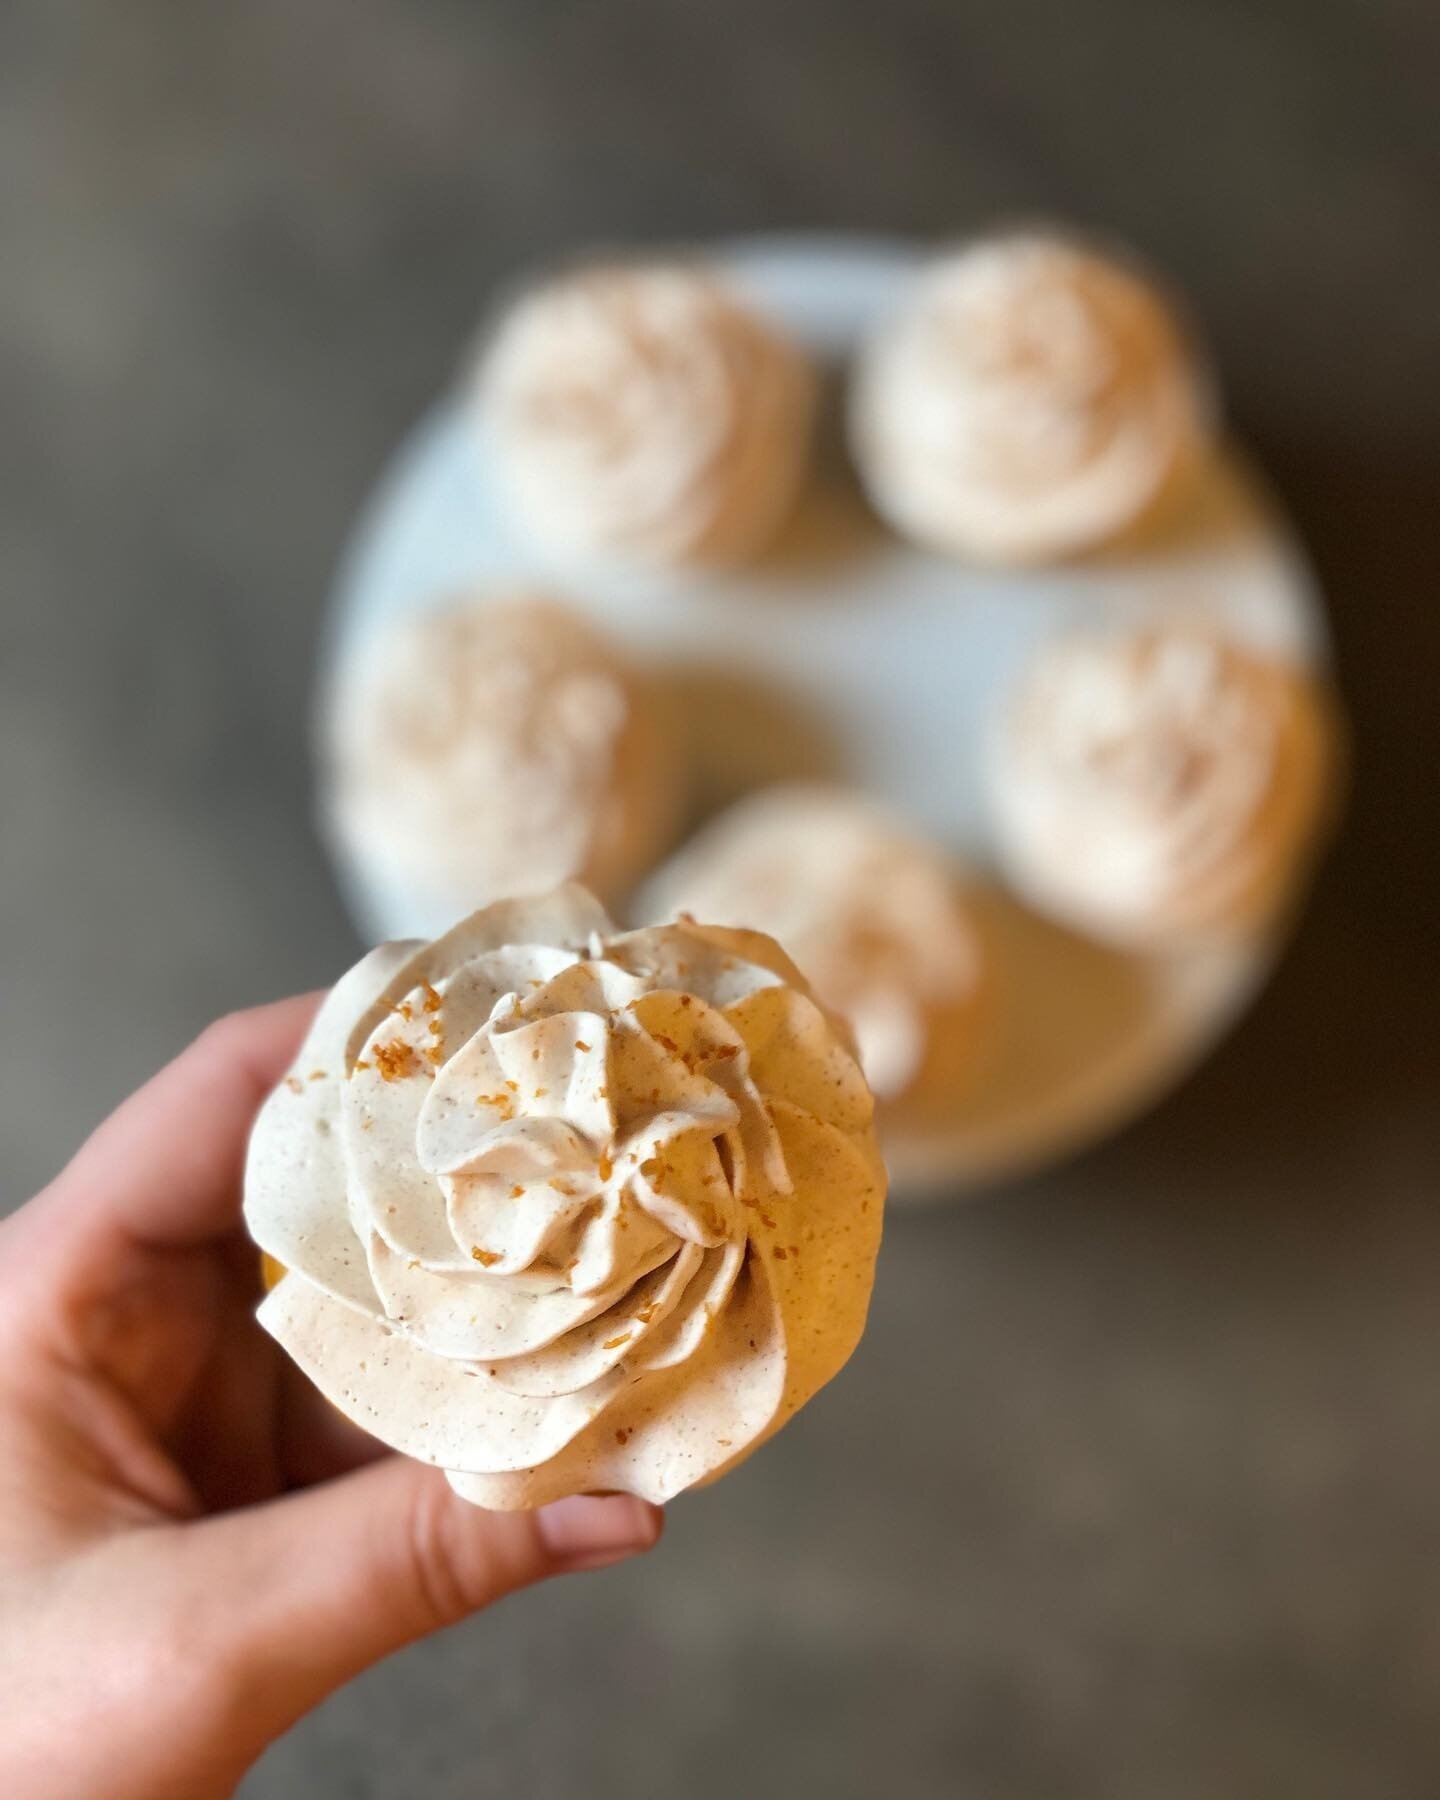 Pumpkin Cupcakes with Cinnamon Cream by @krodi_plant_based_cooking⁠
🧁 who by now we know she is always making mouthwatering treats.⁠
⁠
🧁⁠
It&rsquo;s a pumpkin pancake batter filled with chocolate chips and topped with a cinnamon-spiced cream&hellip